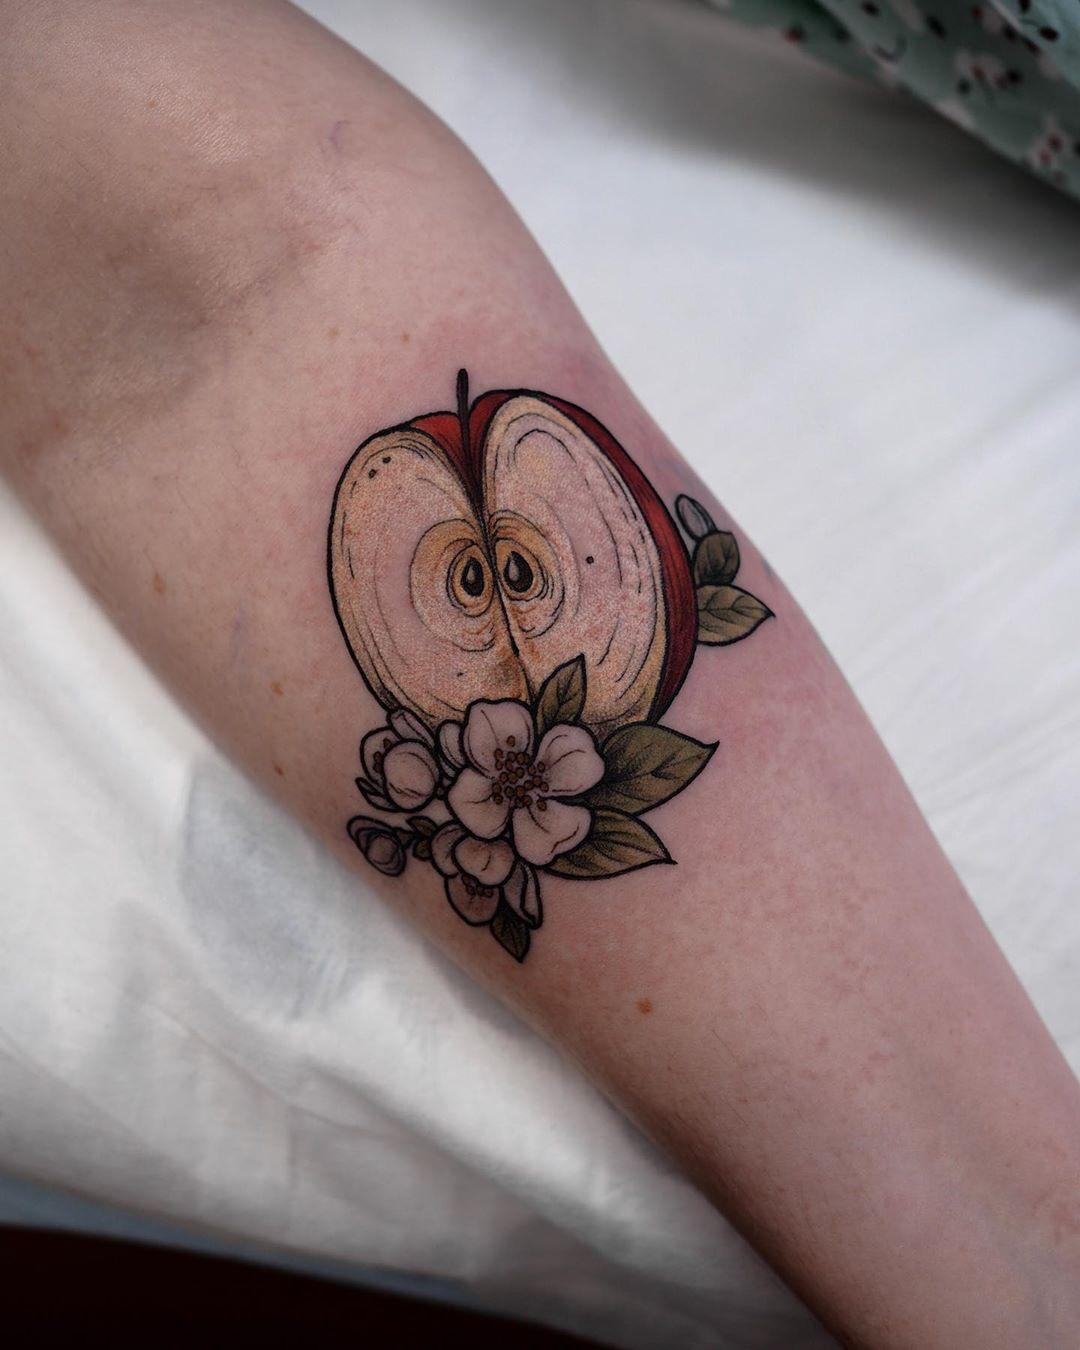 Added a box of apple juice and a peach half to my leg. An ode to Dodie's  song “She” : r/sticknpokes